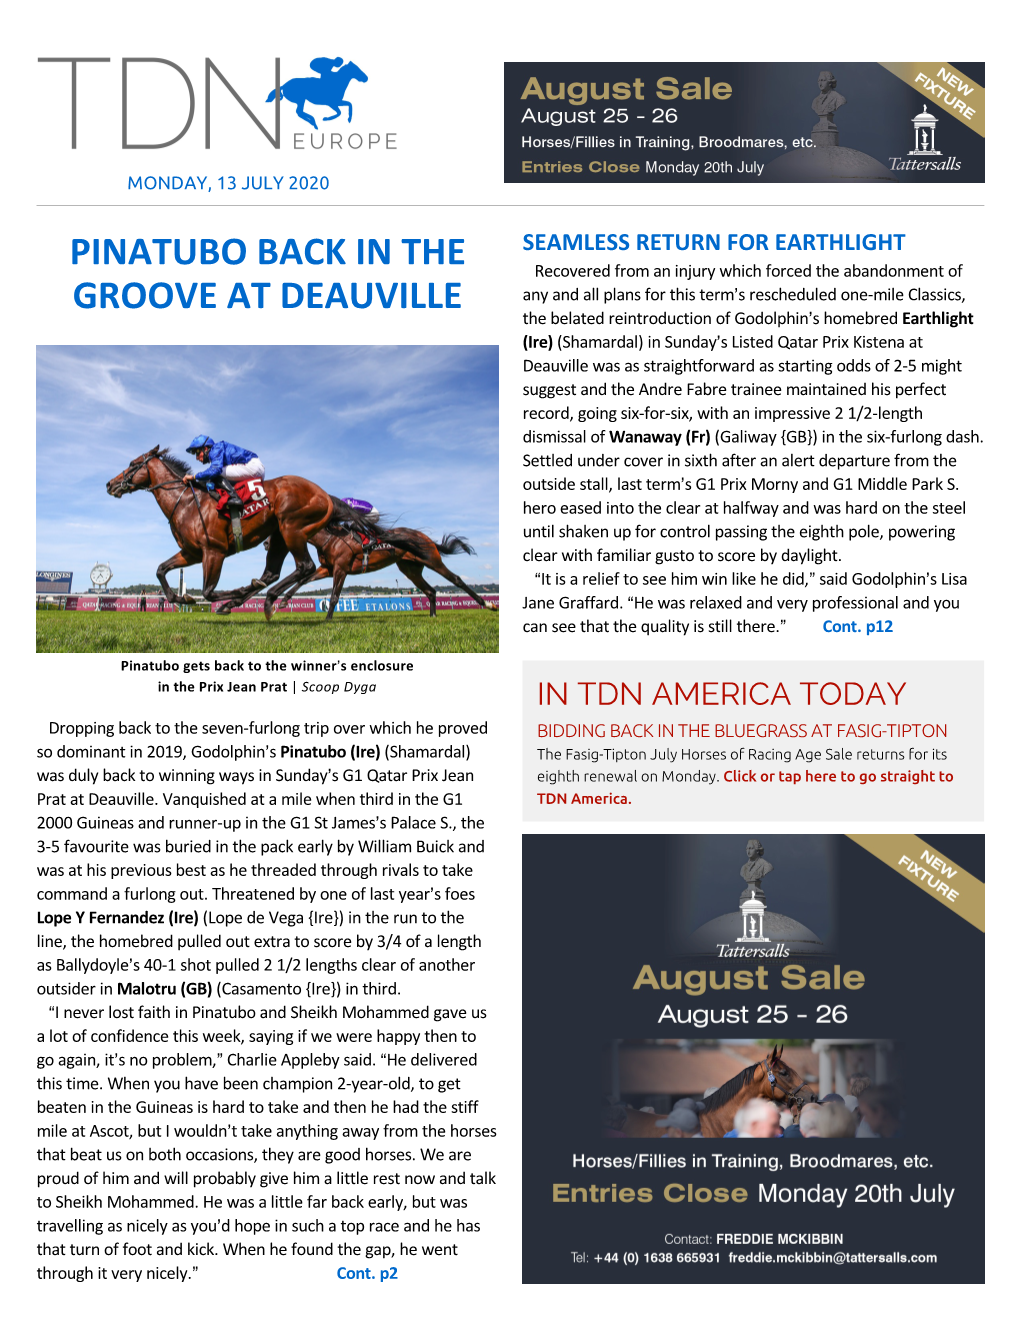 Pinatubo Back in the Groove at Deauville